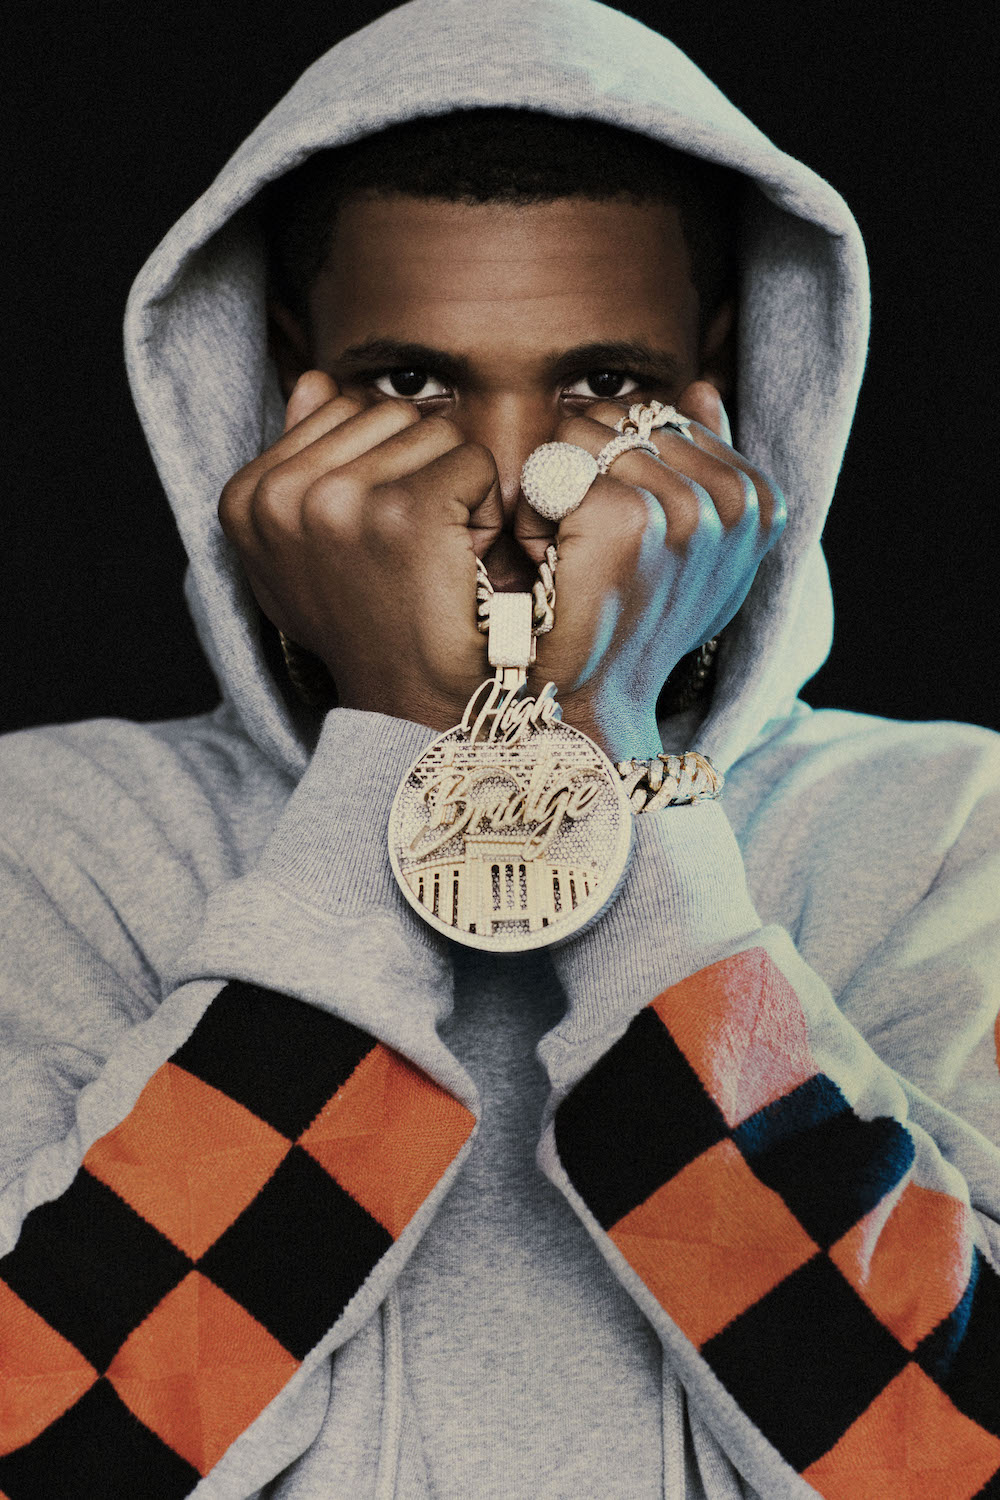 A Boogie Wit Da Hoodie is the rising rap star New York needs